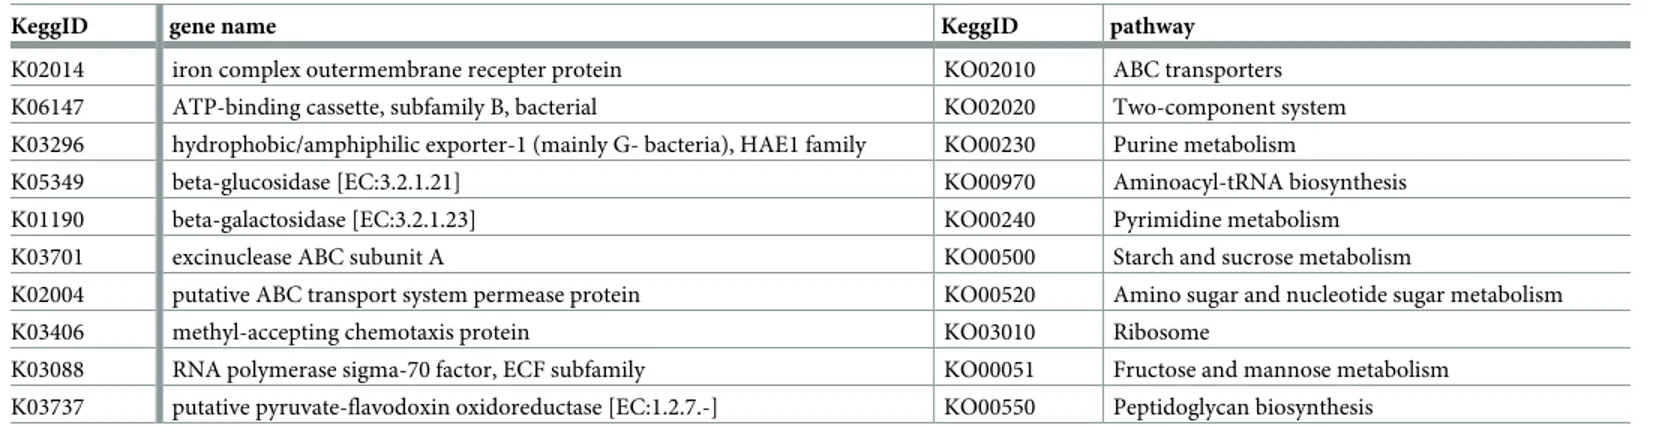 Table 3. Top 10 (most abundant) genes and pathways from metagenome prediction in the 15 calves samples.